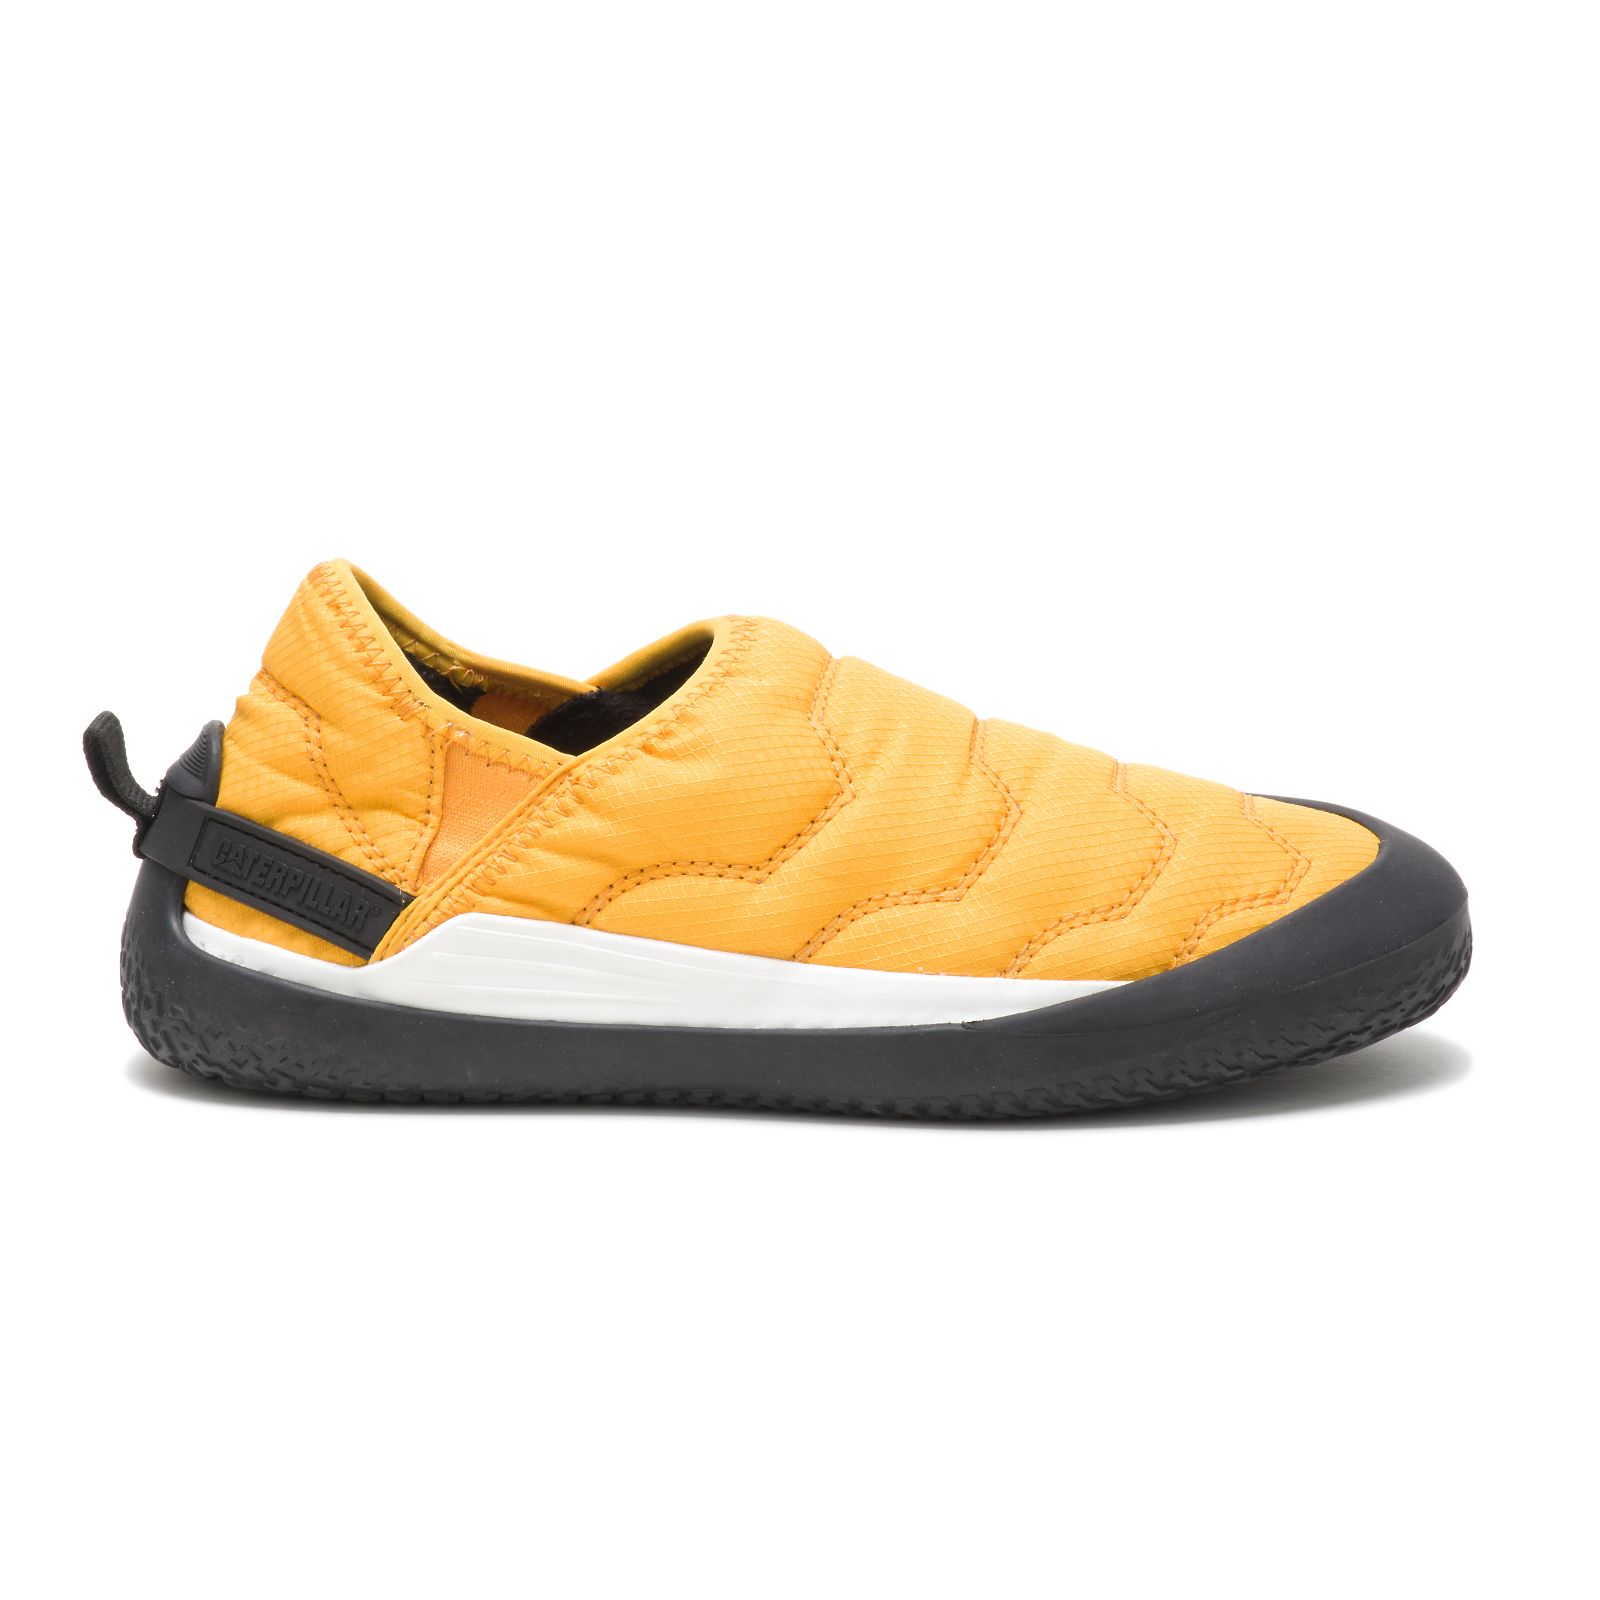 Caterpillar Shoes Sale Pakistan - Caterpillar Crossover Mens Slip On Shoes Yellow (934260-GOM)